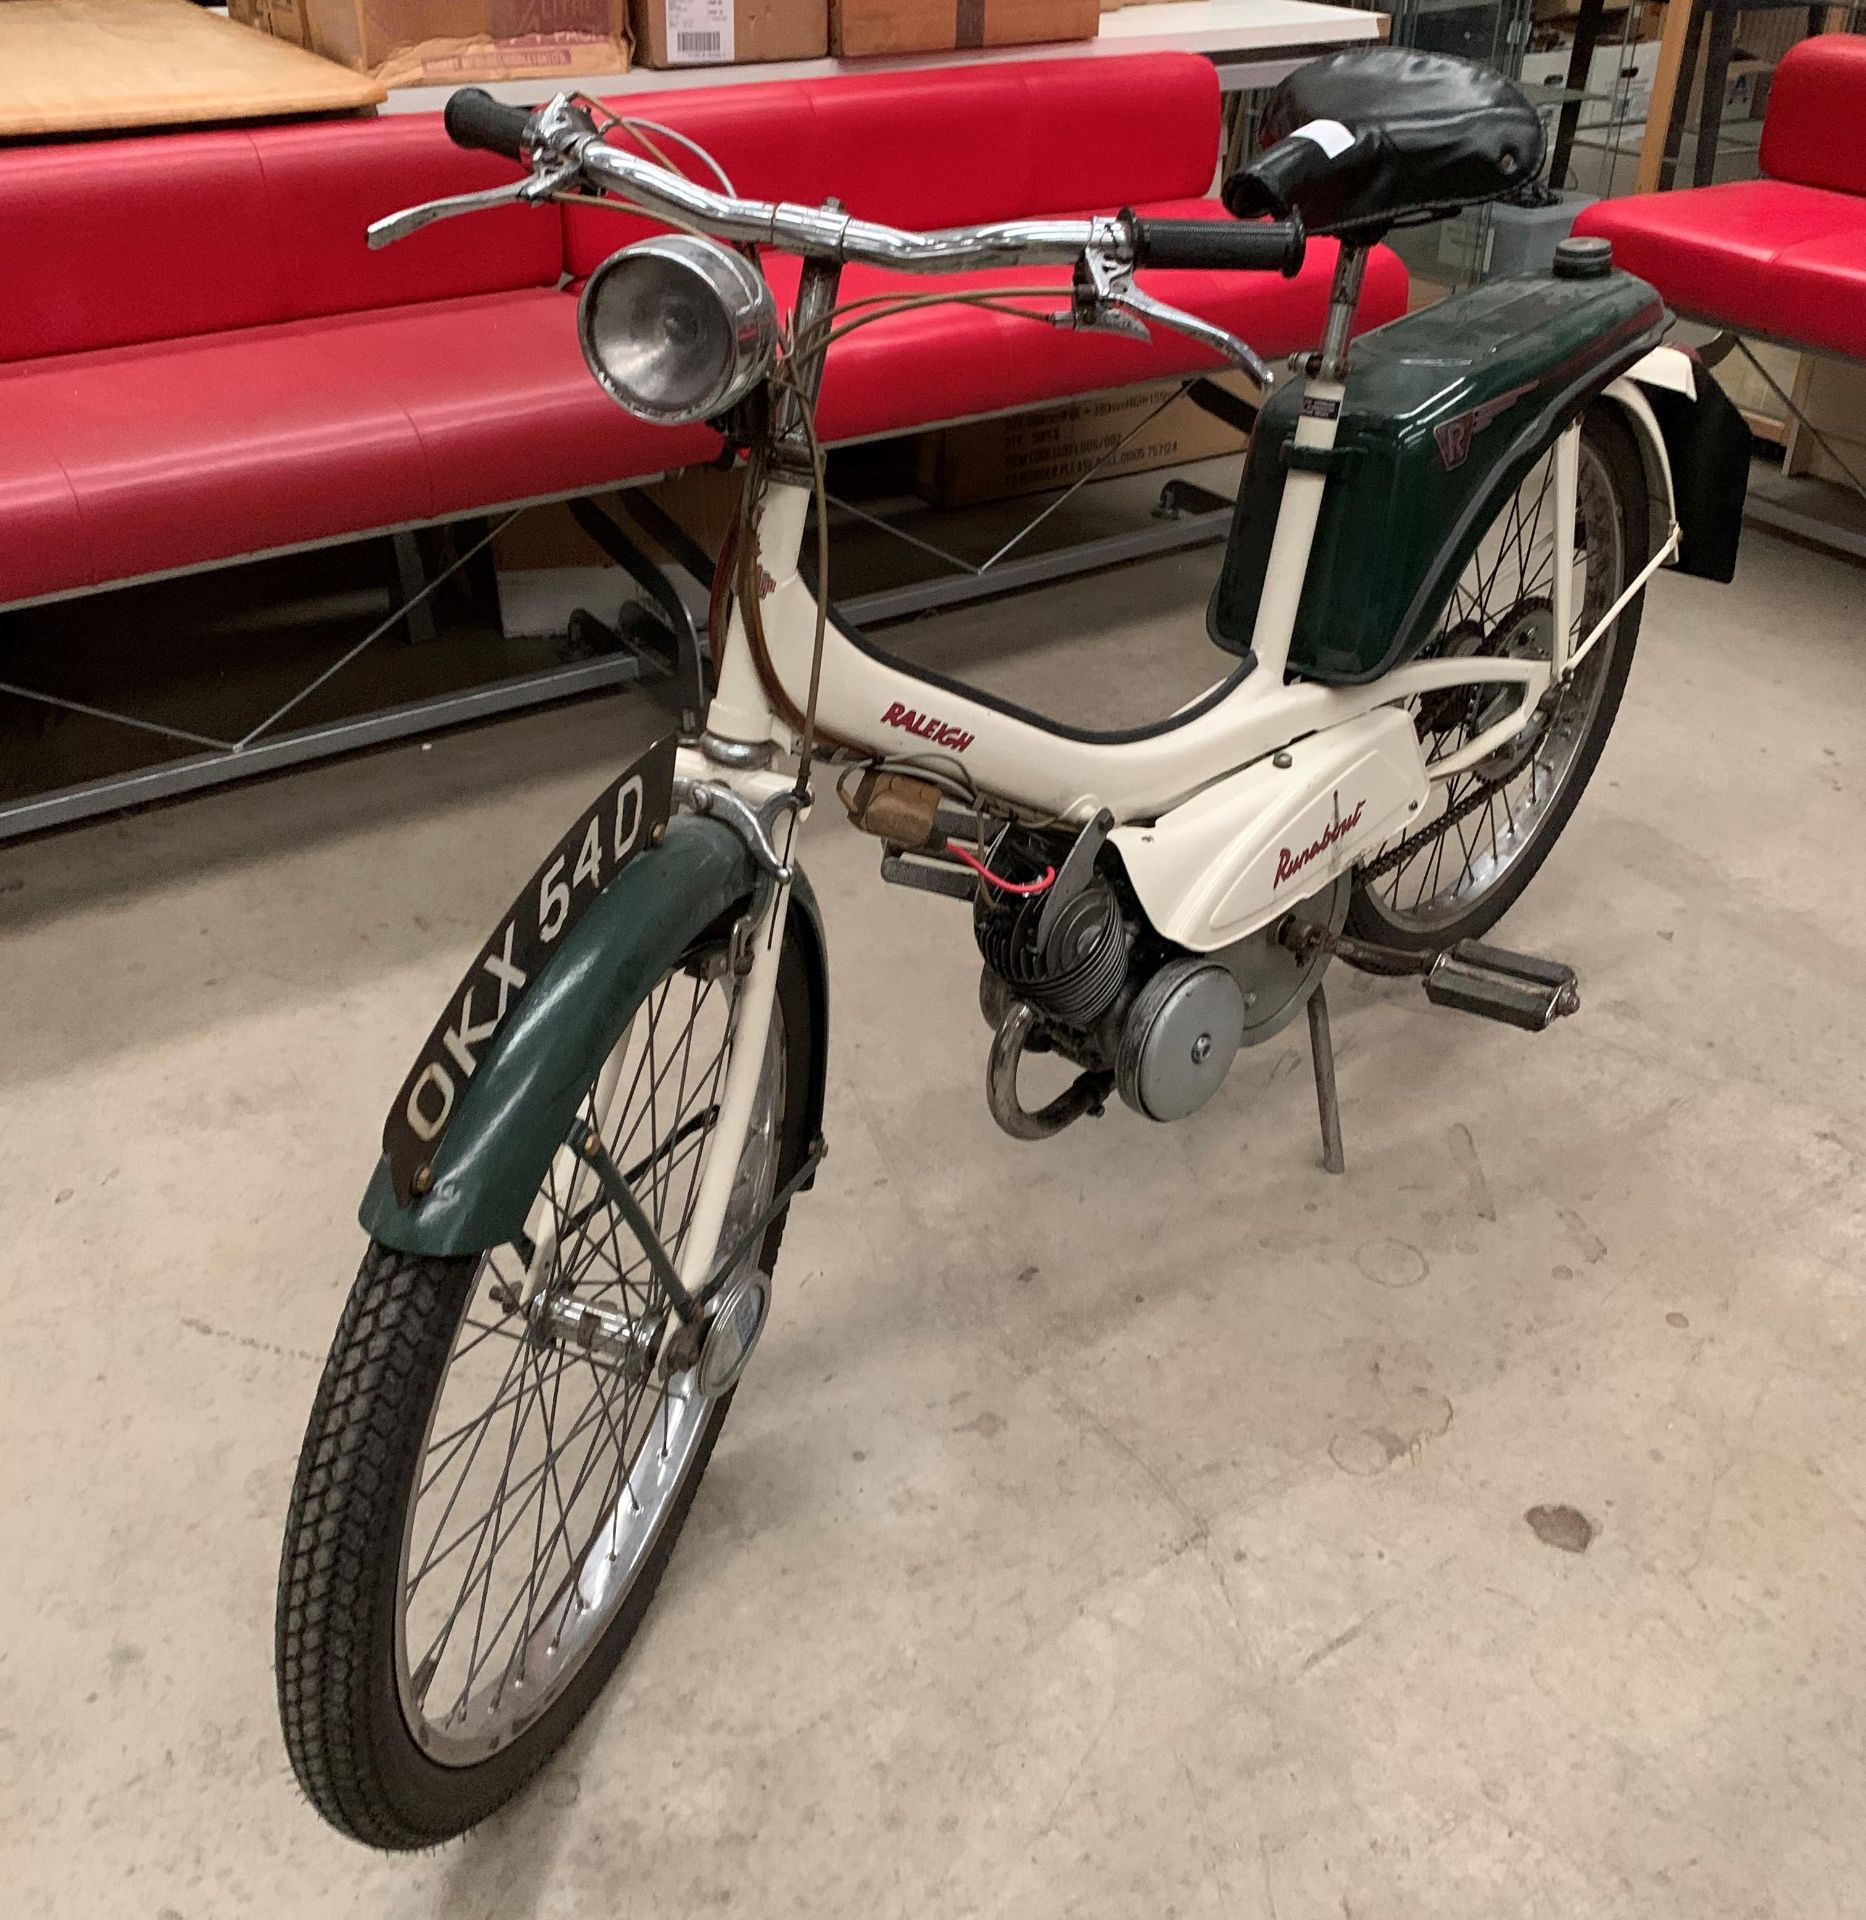 A RALEIGH RUNABOUT MODEL RM6 MOPED - Petrol - Green/White. - Image 2 of 6